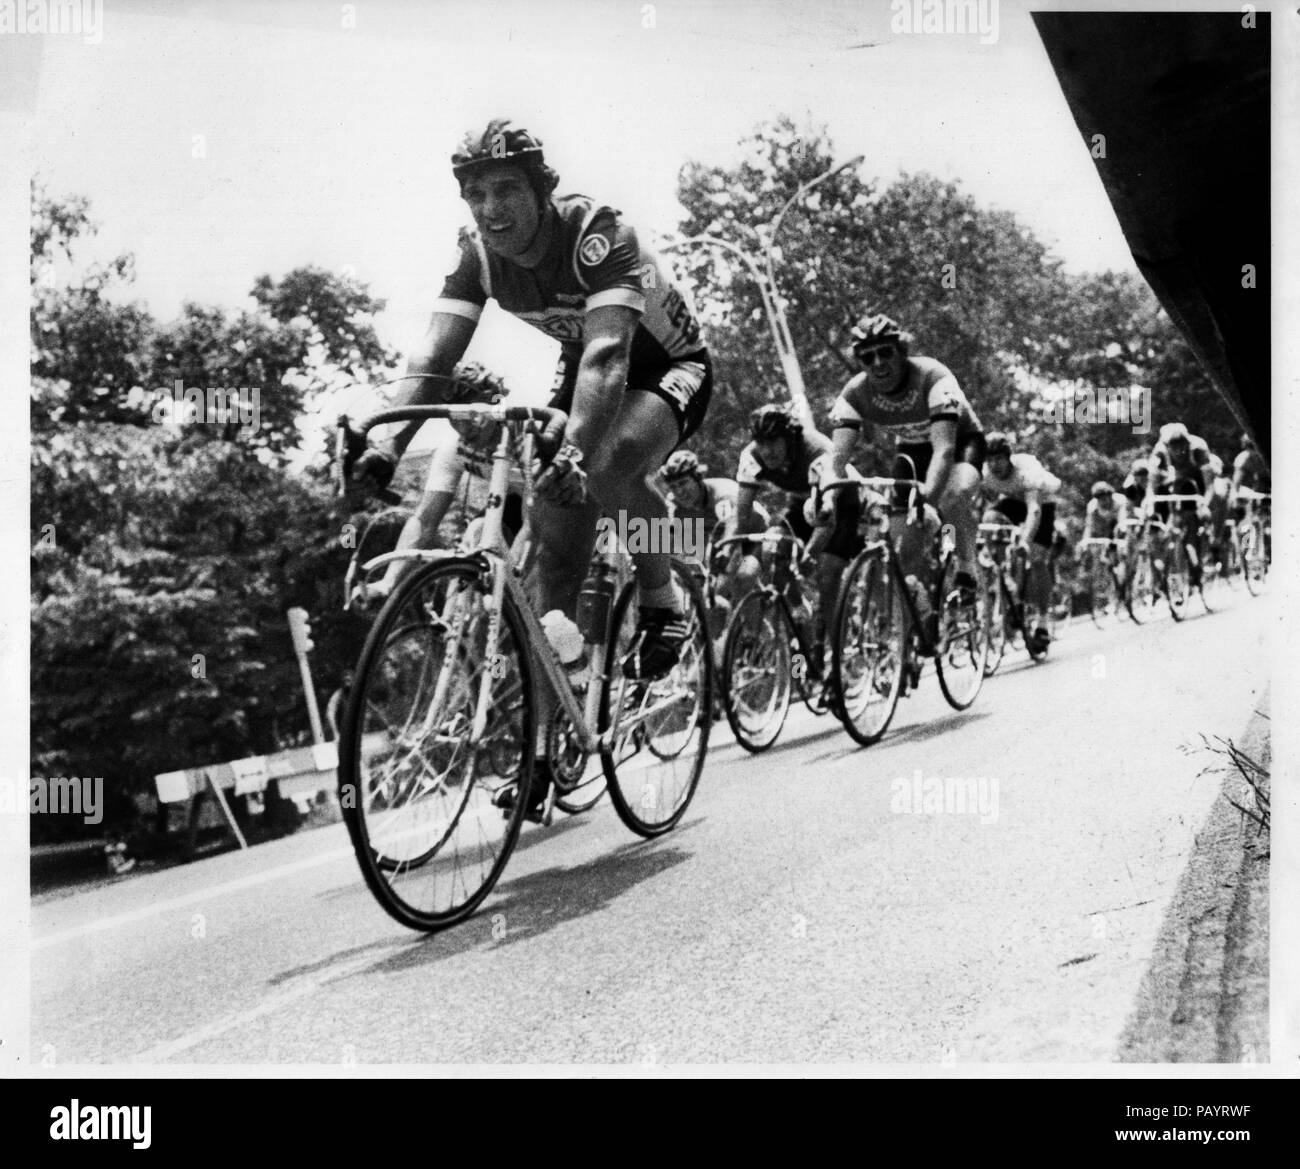 Eric Heiden racing for 7-11 professional cycling team in Central Park on June 1983 in New York, NY. Photo by Francis Specker Stock Photo